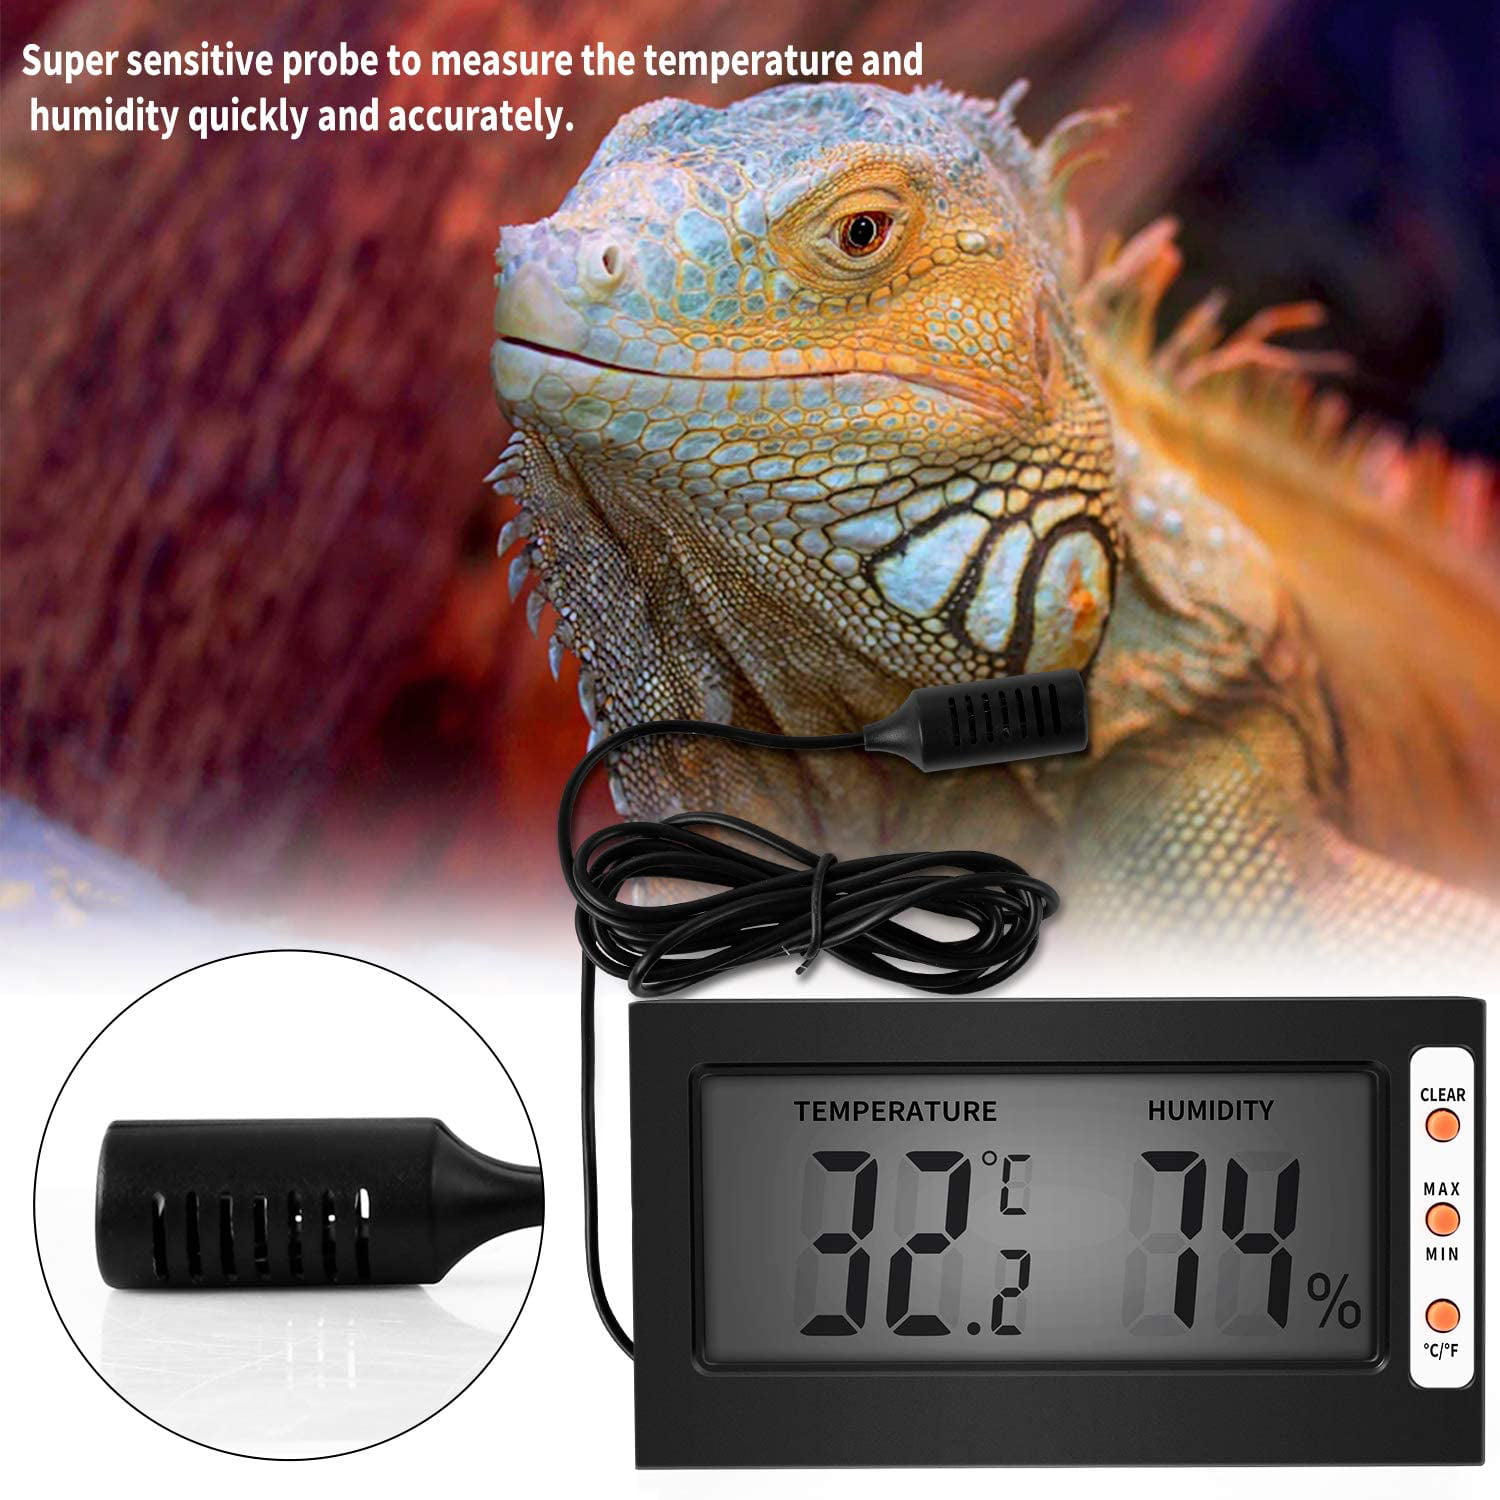 Simple Deluxe Digital Thermohygrometers and Hygrometer with Temperature and Humidity Probe for Reptile Tank, Black